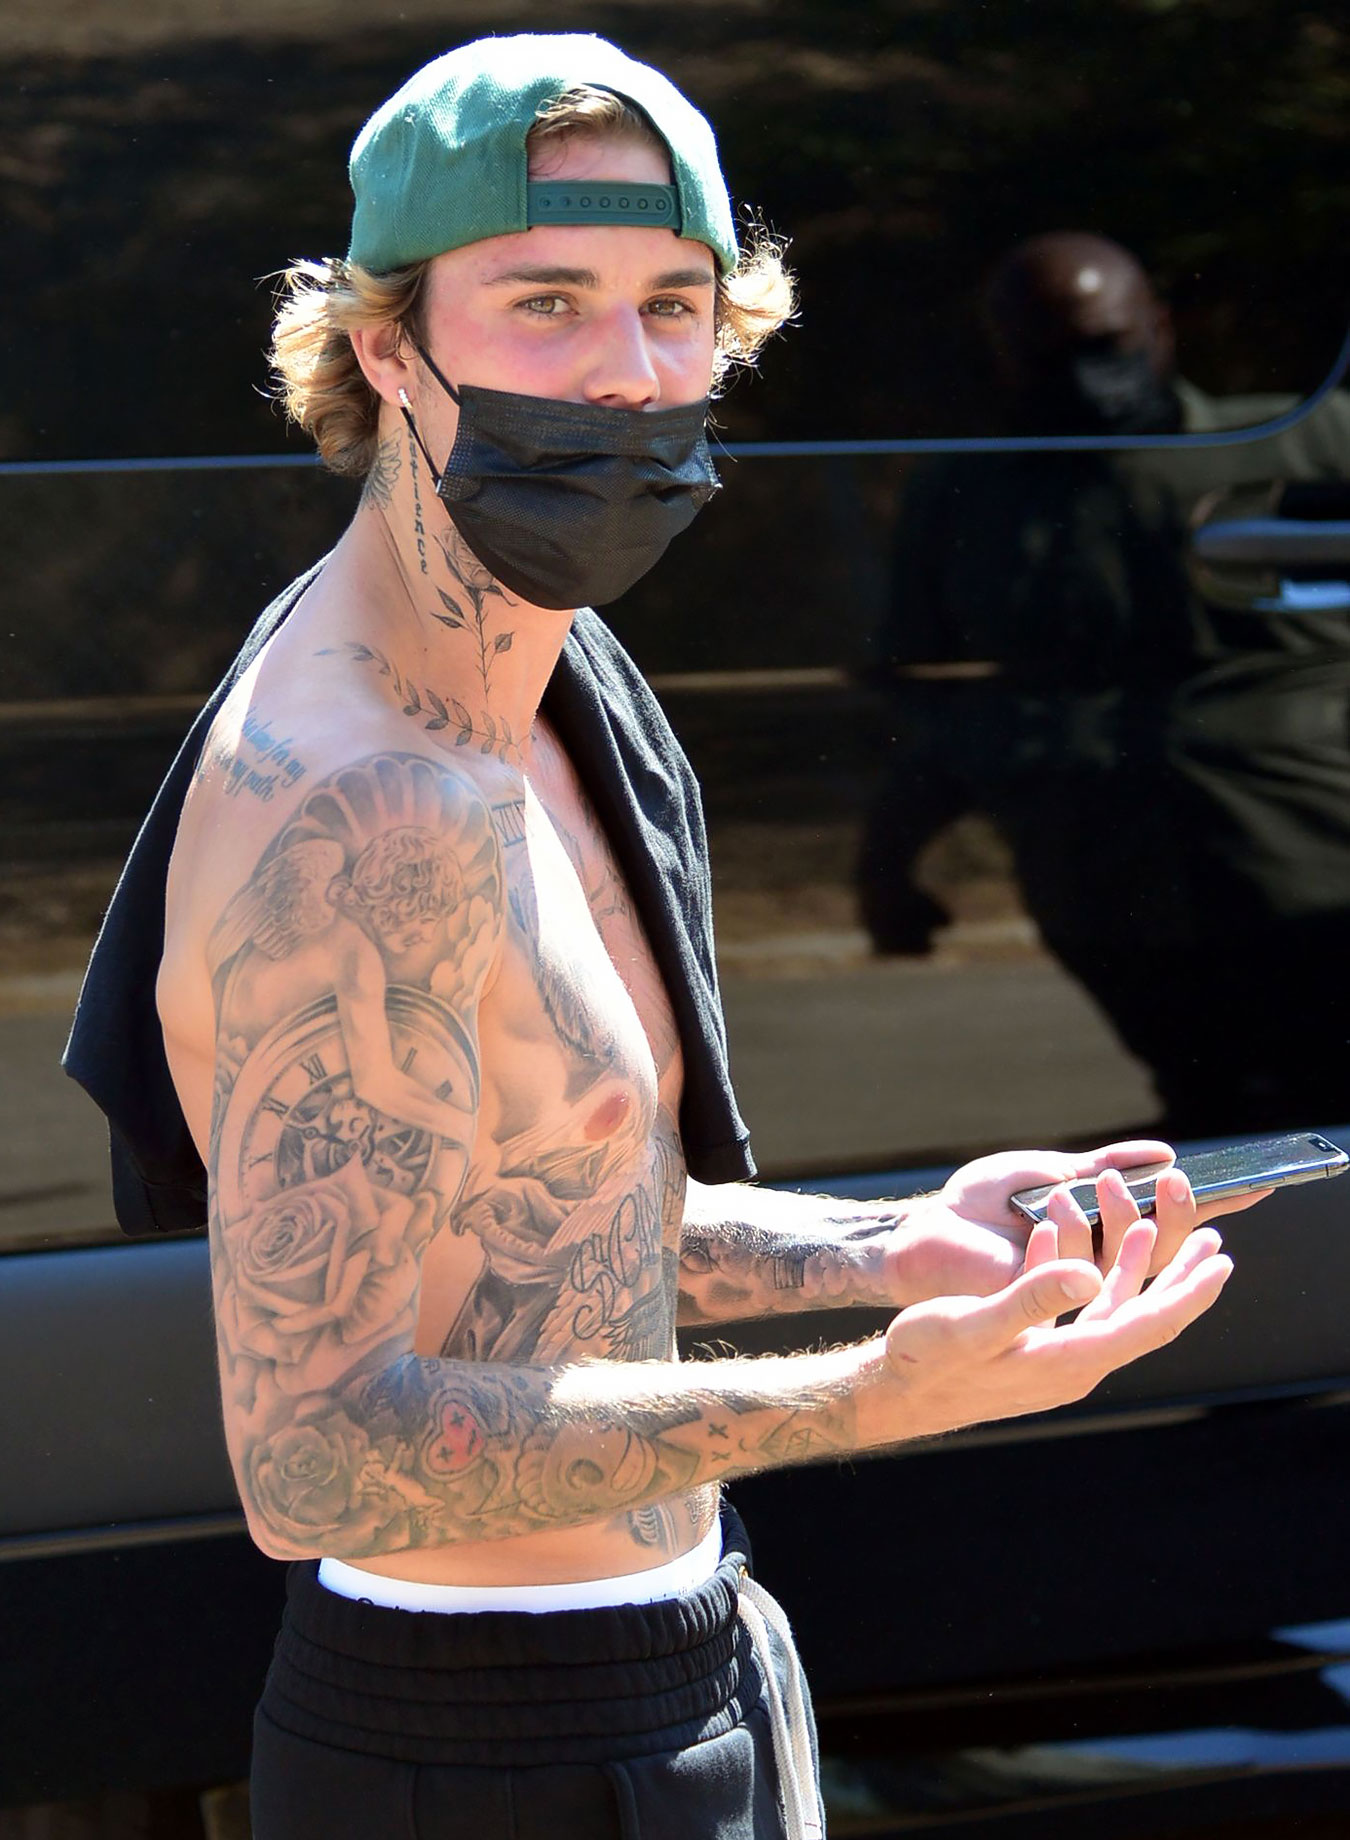 Justin Bieber With No Tats Watch His Tattoos Disappear in This Video   Heavycom